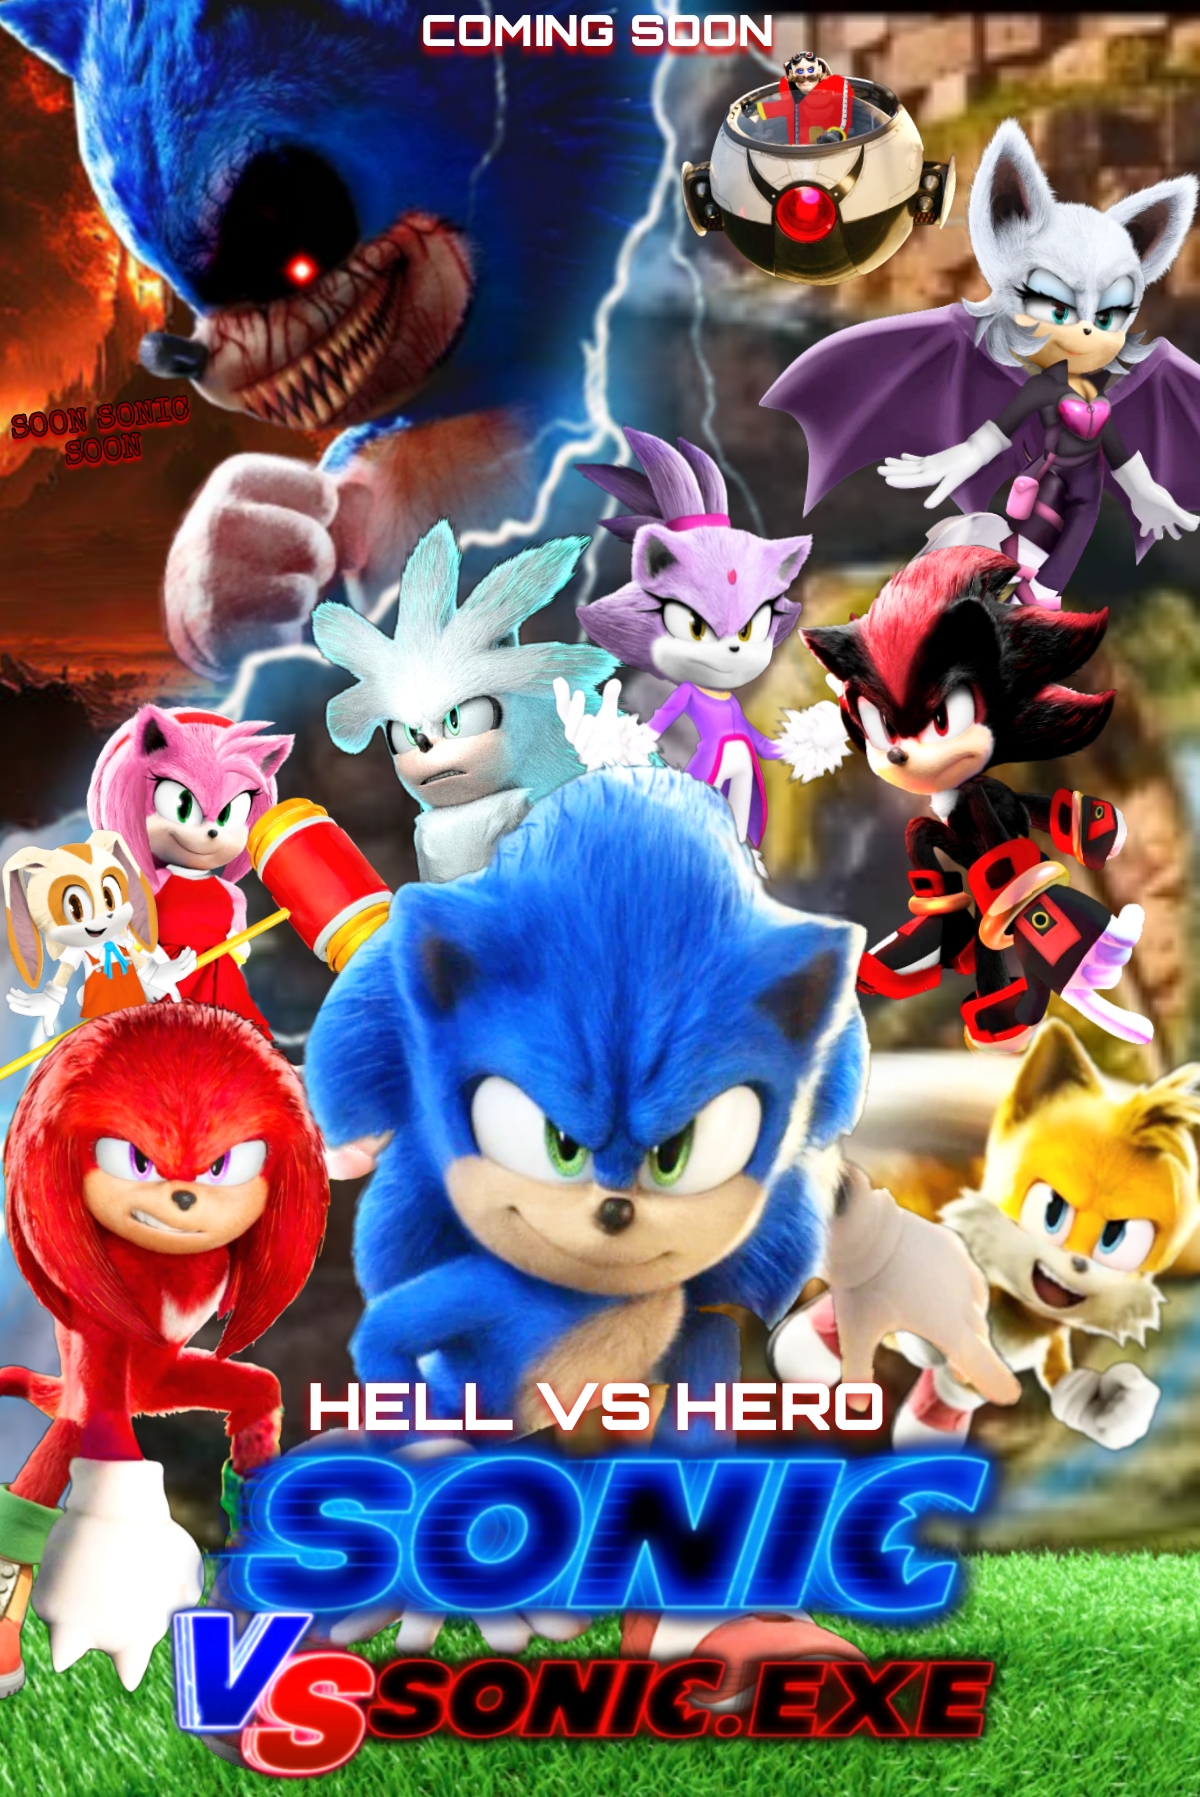 Sonic the Hedgehog Movie - Poster by RealSonicSpeed on DeviantArt